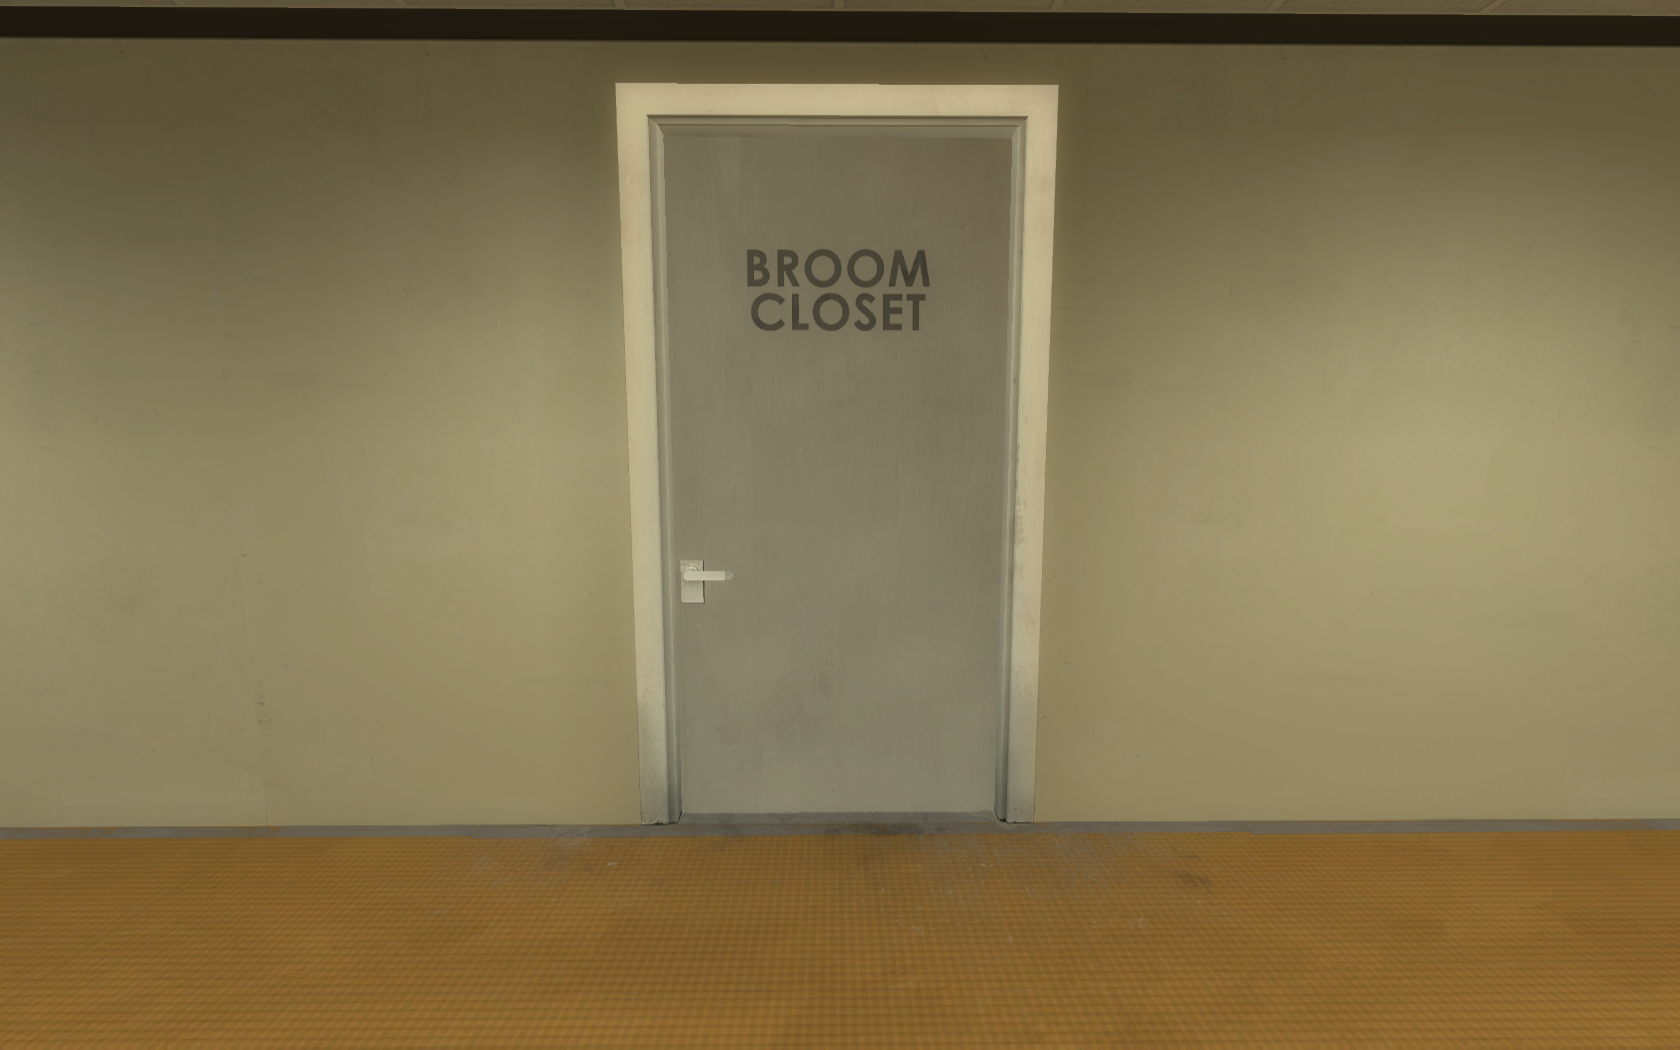 Stanley parable broom closet